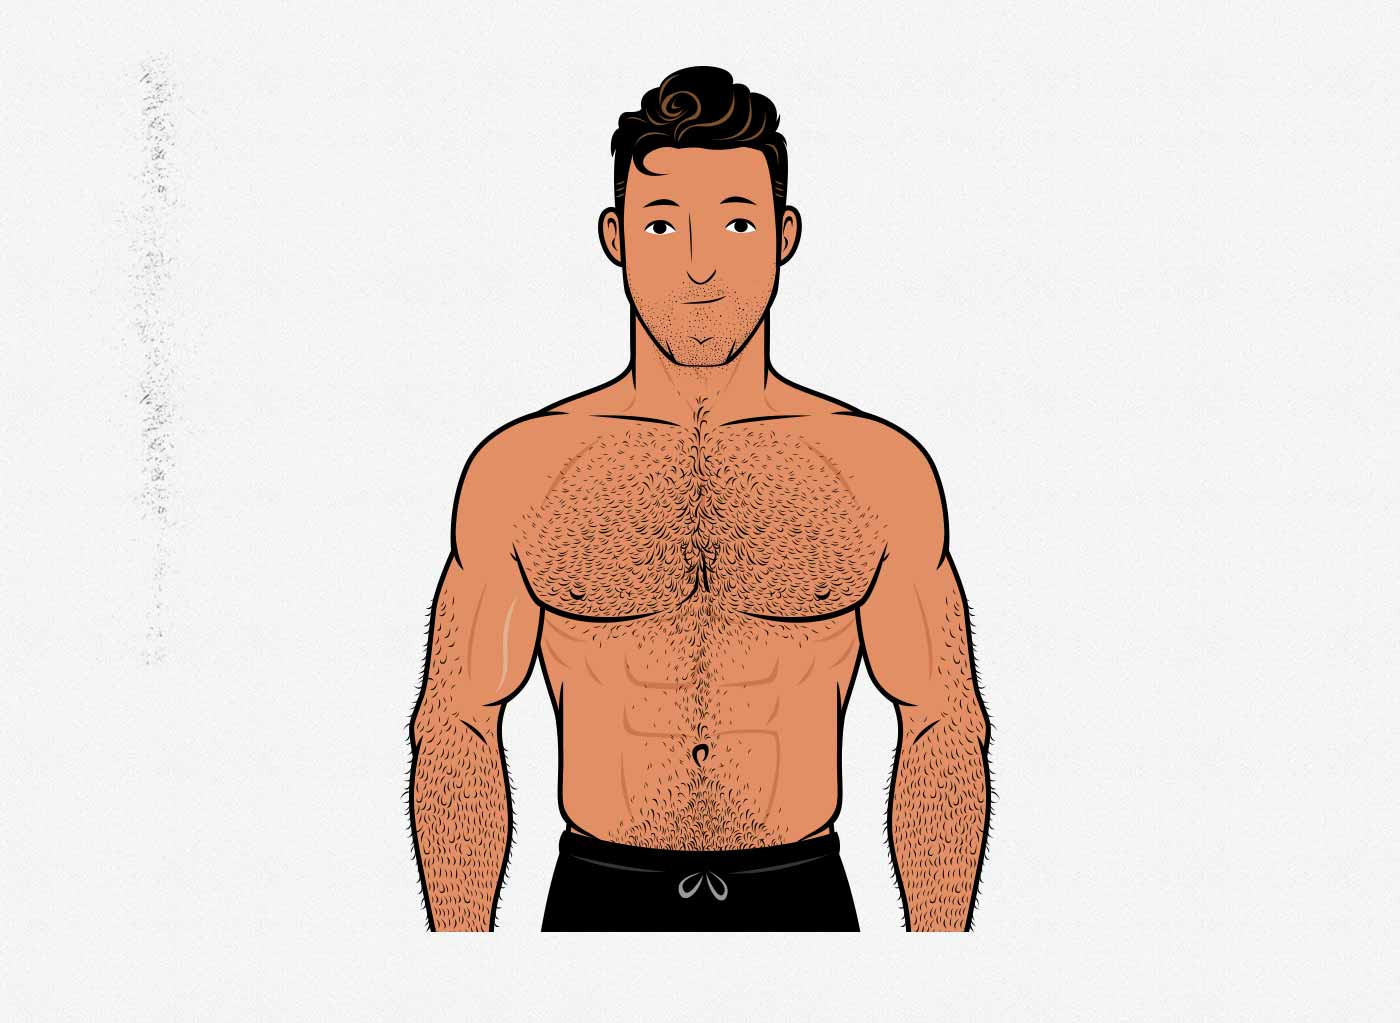 Illustration of a man with the ideal shoulder circumference measurements.